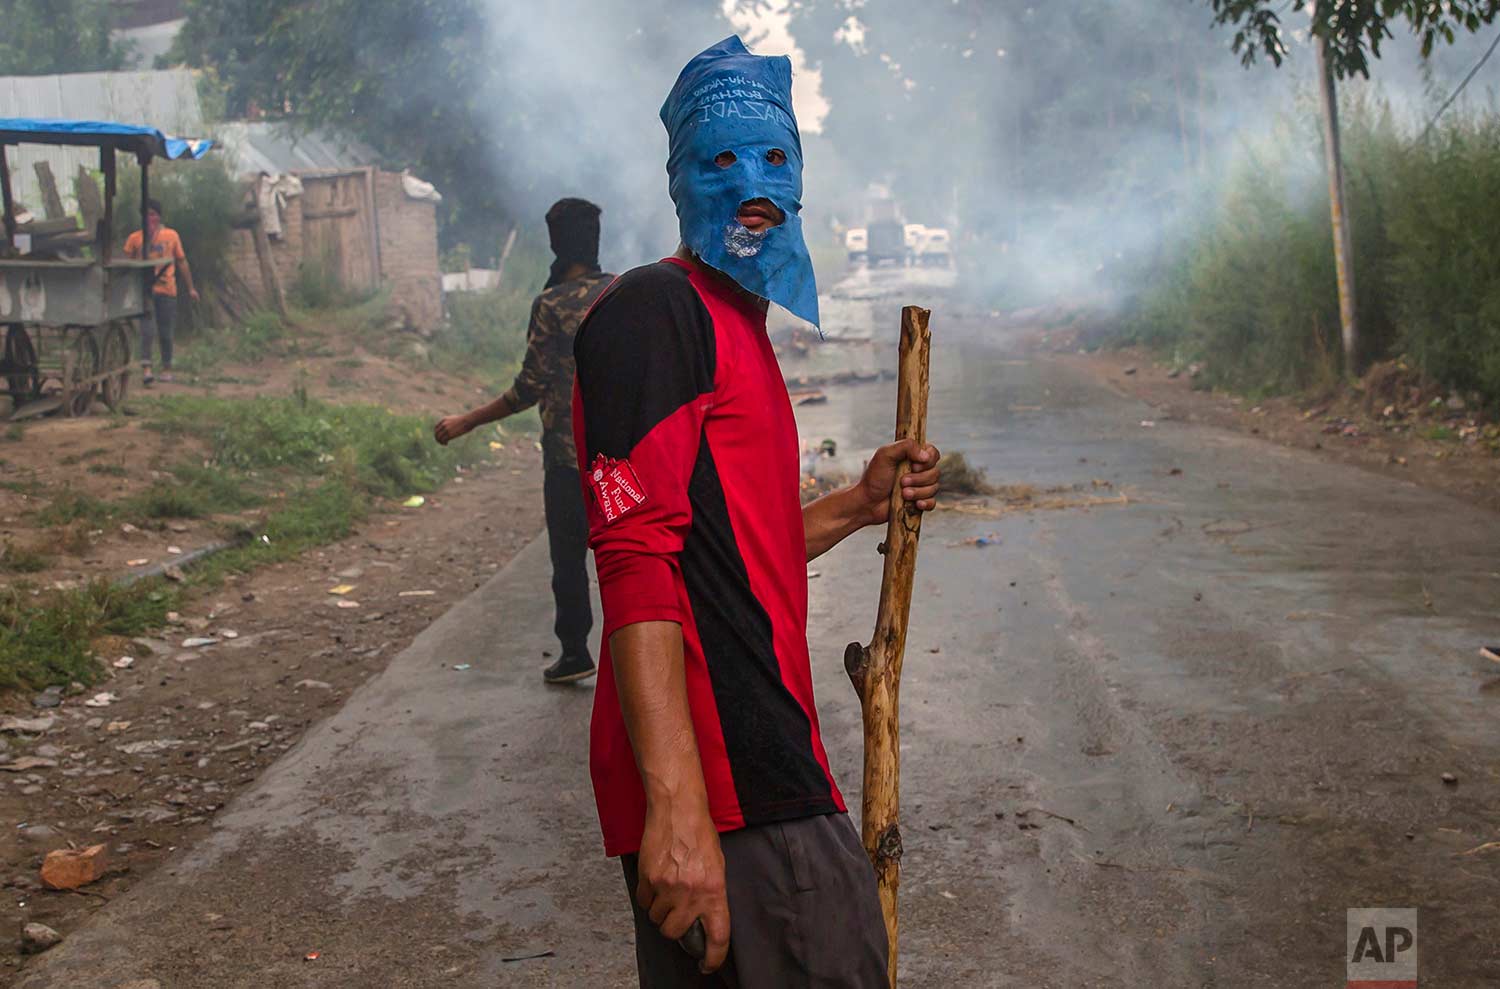  A masked villager holds a wooden stick and stones during a protest following the funeral procession of Akeel Ahmed Bhat, a teenage boy in Haal village, about 47 kilometers (29 miles) south of Srinagar, Indian controlled Kashmir, Wednesday, Aug. 2, 2